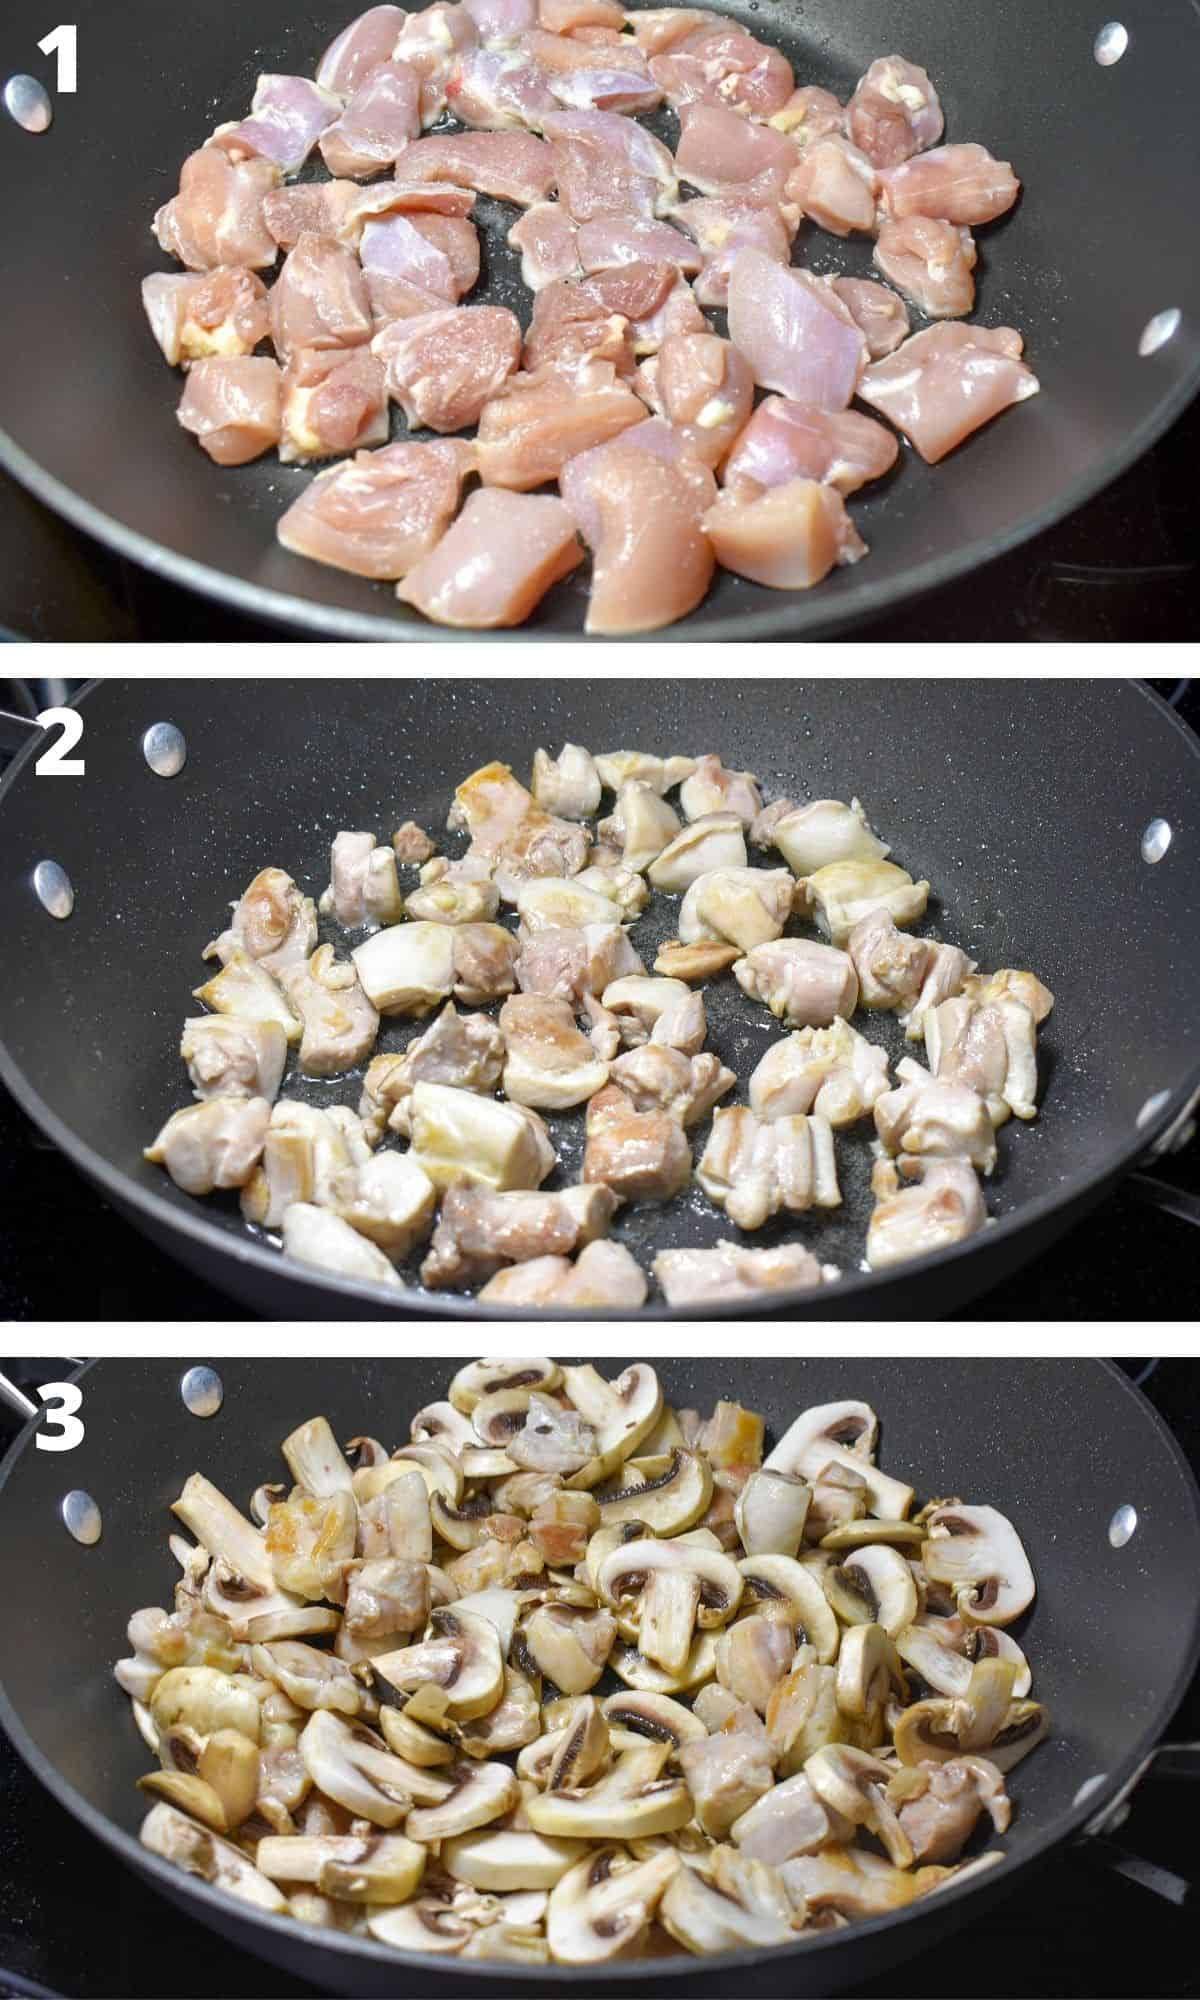 A collage of three images showing browning chicken thigh pieces and mushrooms added to a large, black skillet.